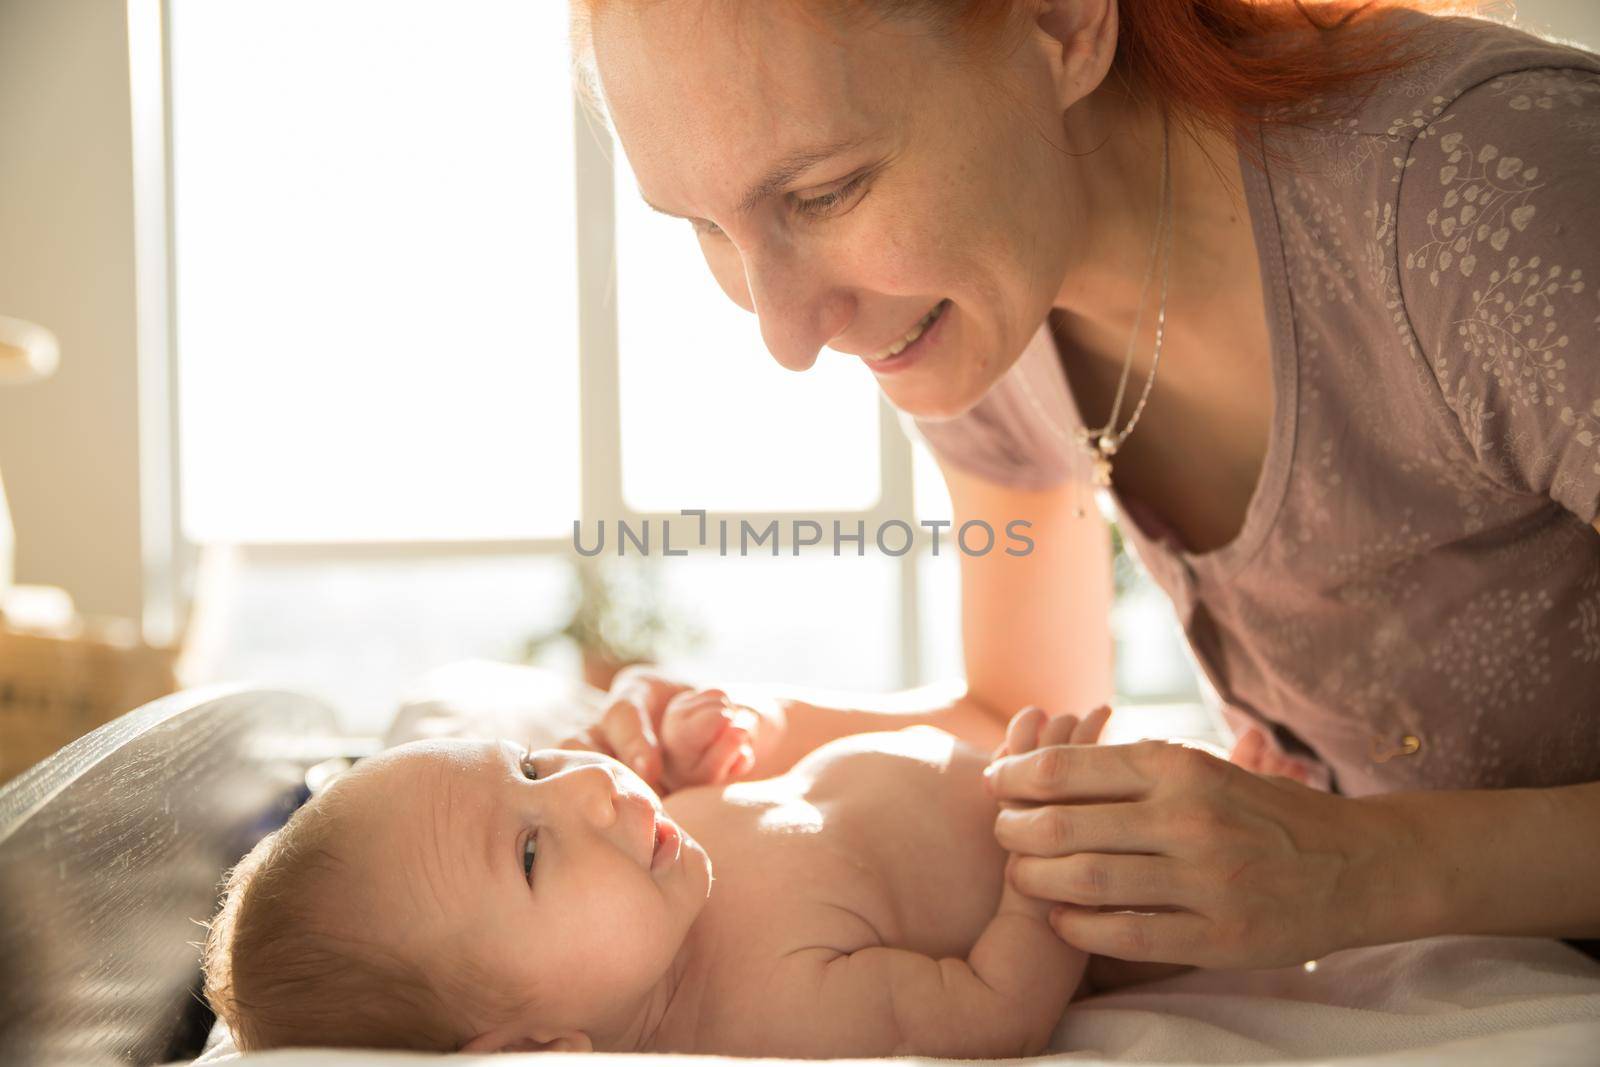 Smiling ginger woman mother takes care of her small baby lying on a bed. Mid shot